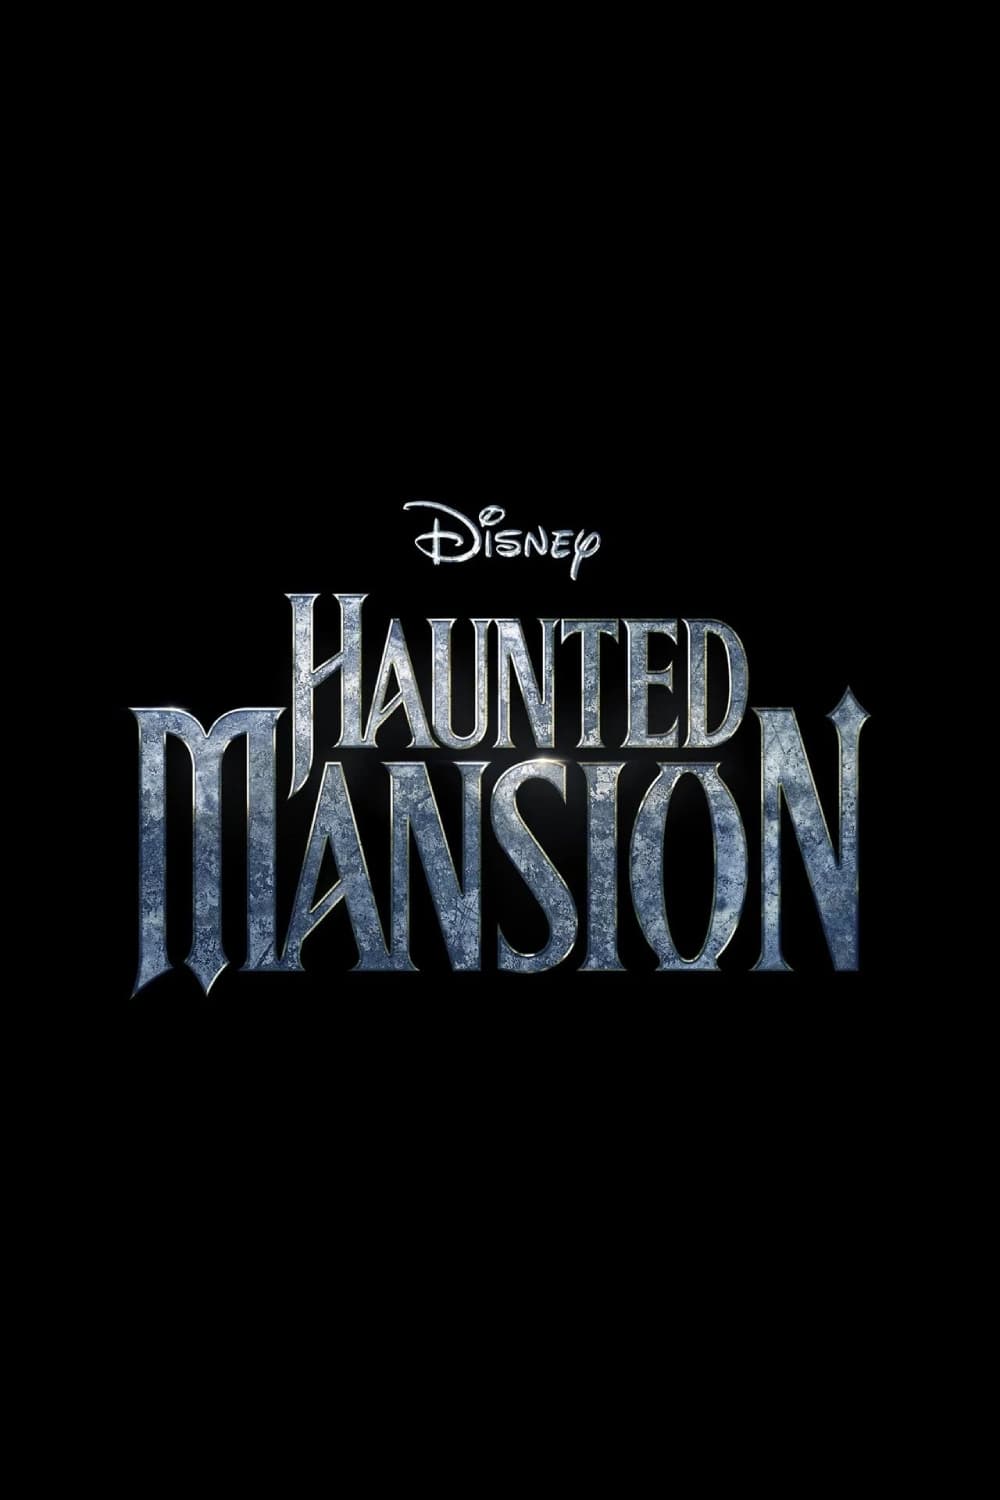 Poster for the movie "Haunted Mansion"